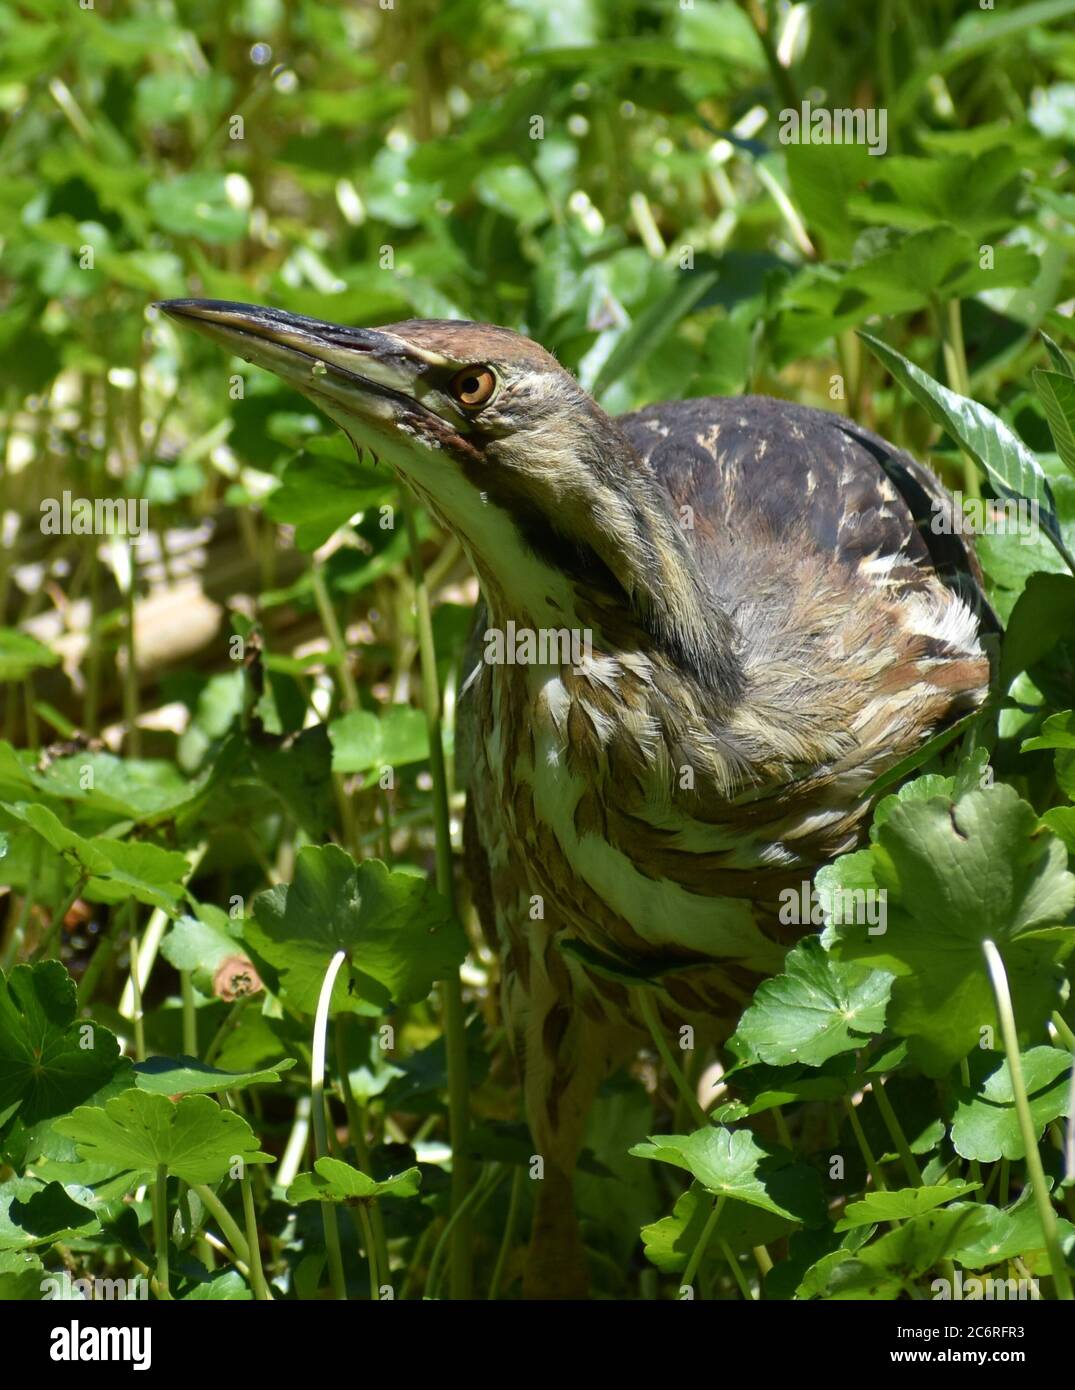 An American bittern (Botaurus lentiginosus) gives a menacing glare from amongst the water plants at the edge of Pinto Lake in California Stock Photo